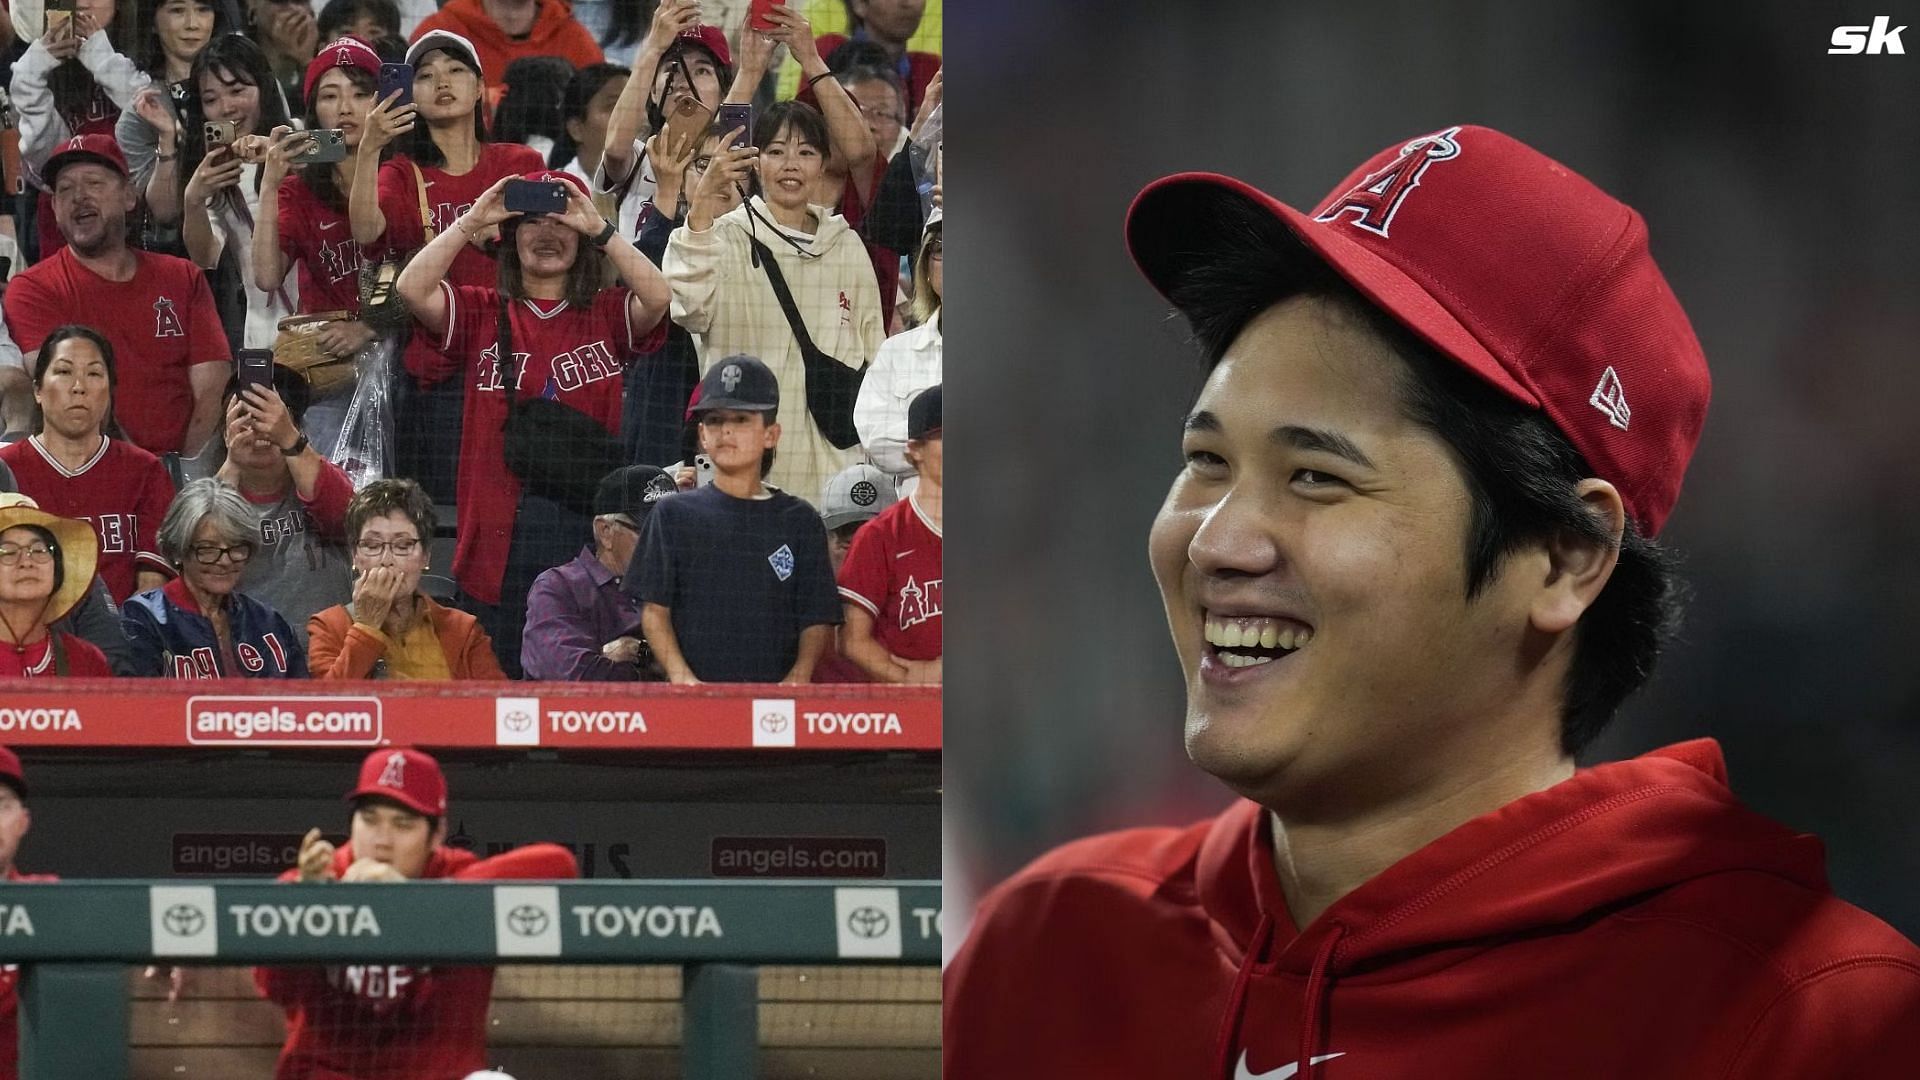 Japanese fans flock to see Ohtani's Angels